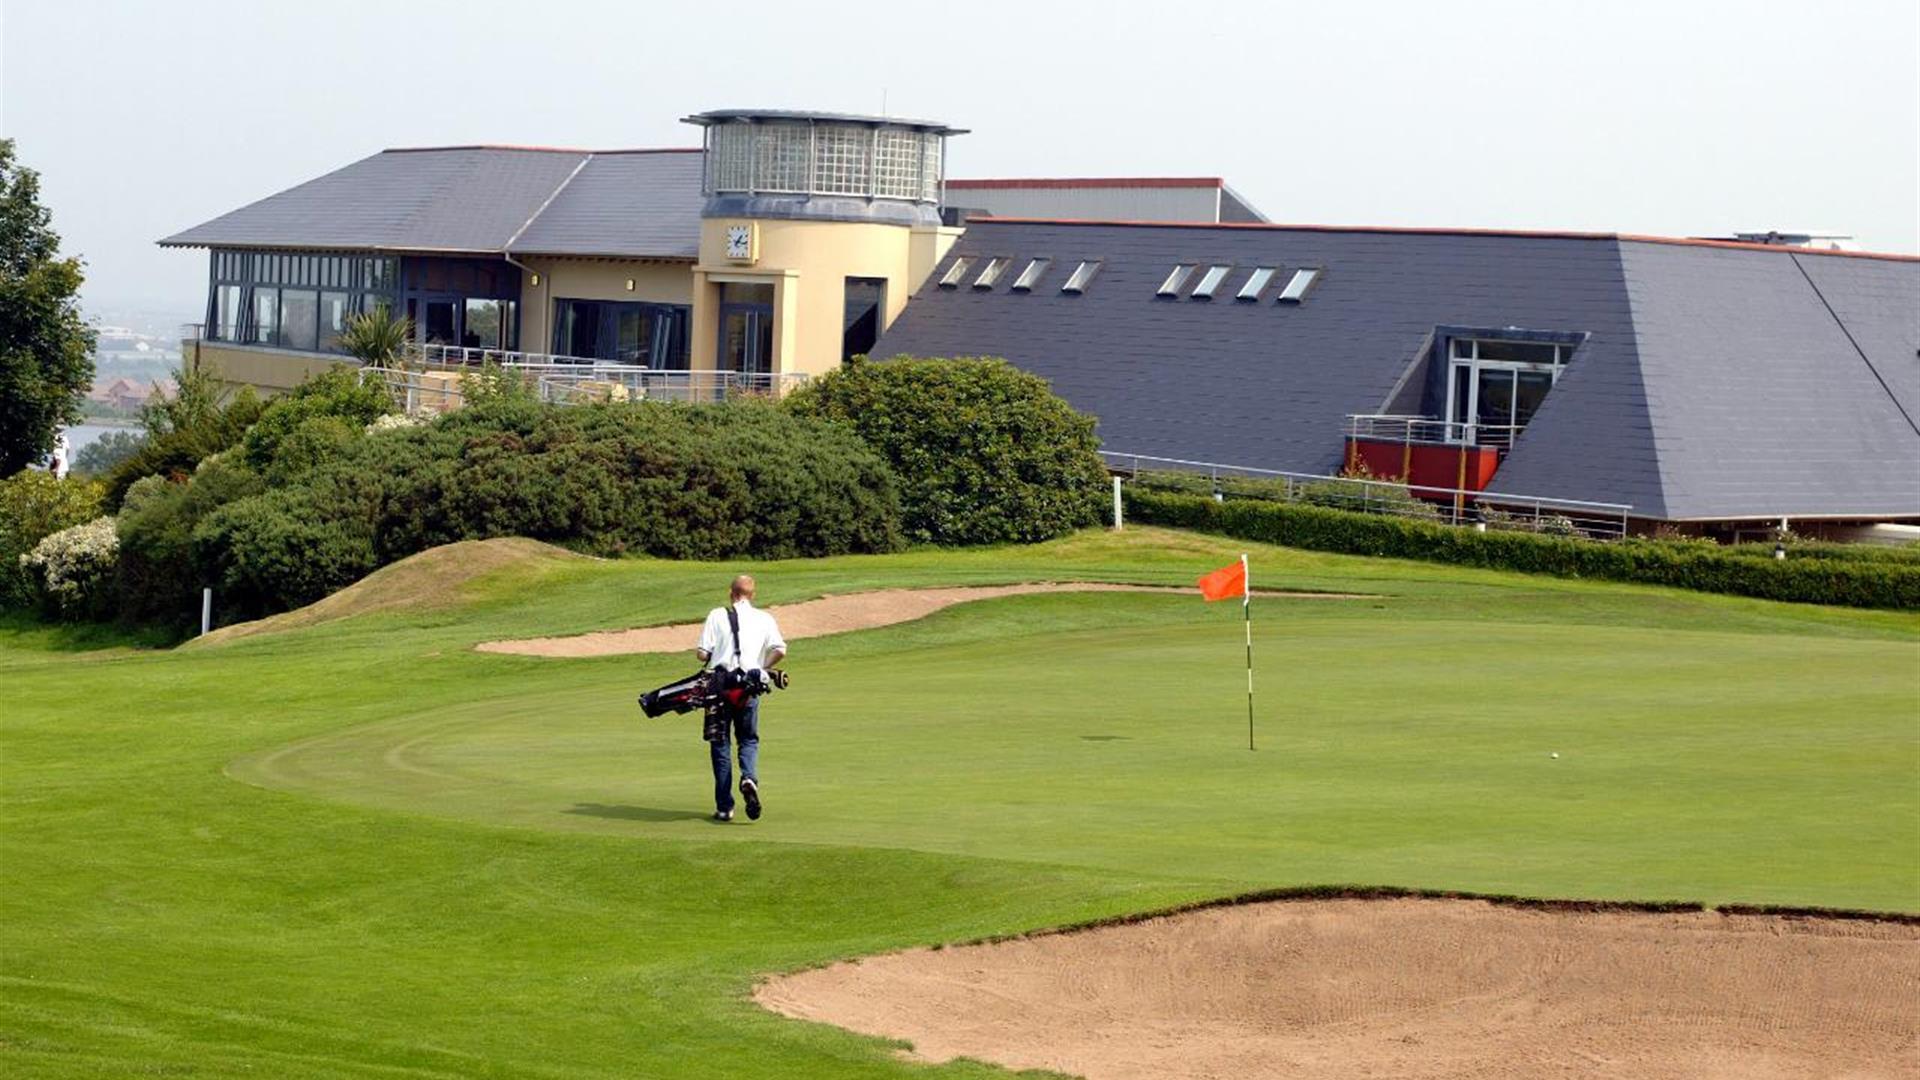 Photo of Club house and a golfer on the green to the forefront